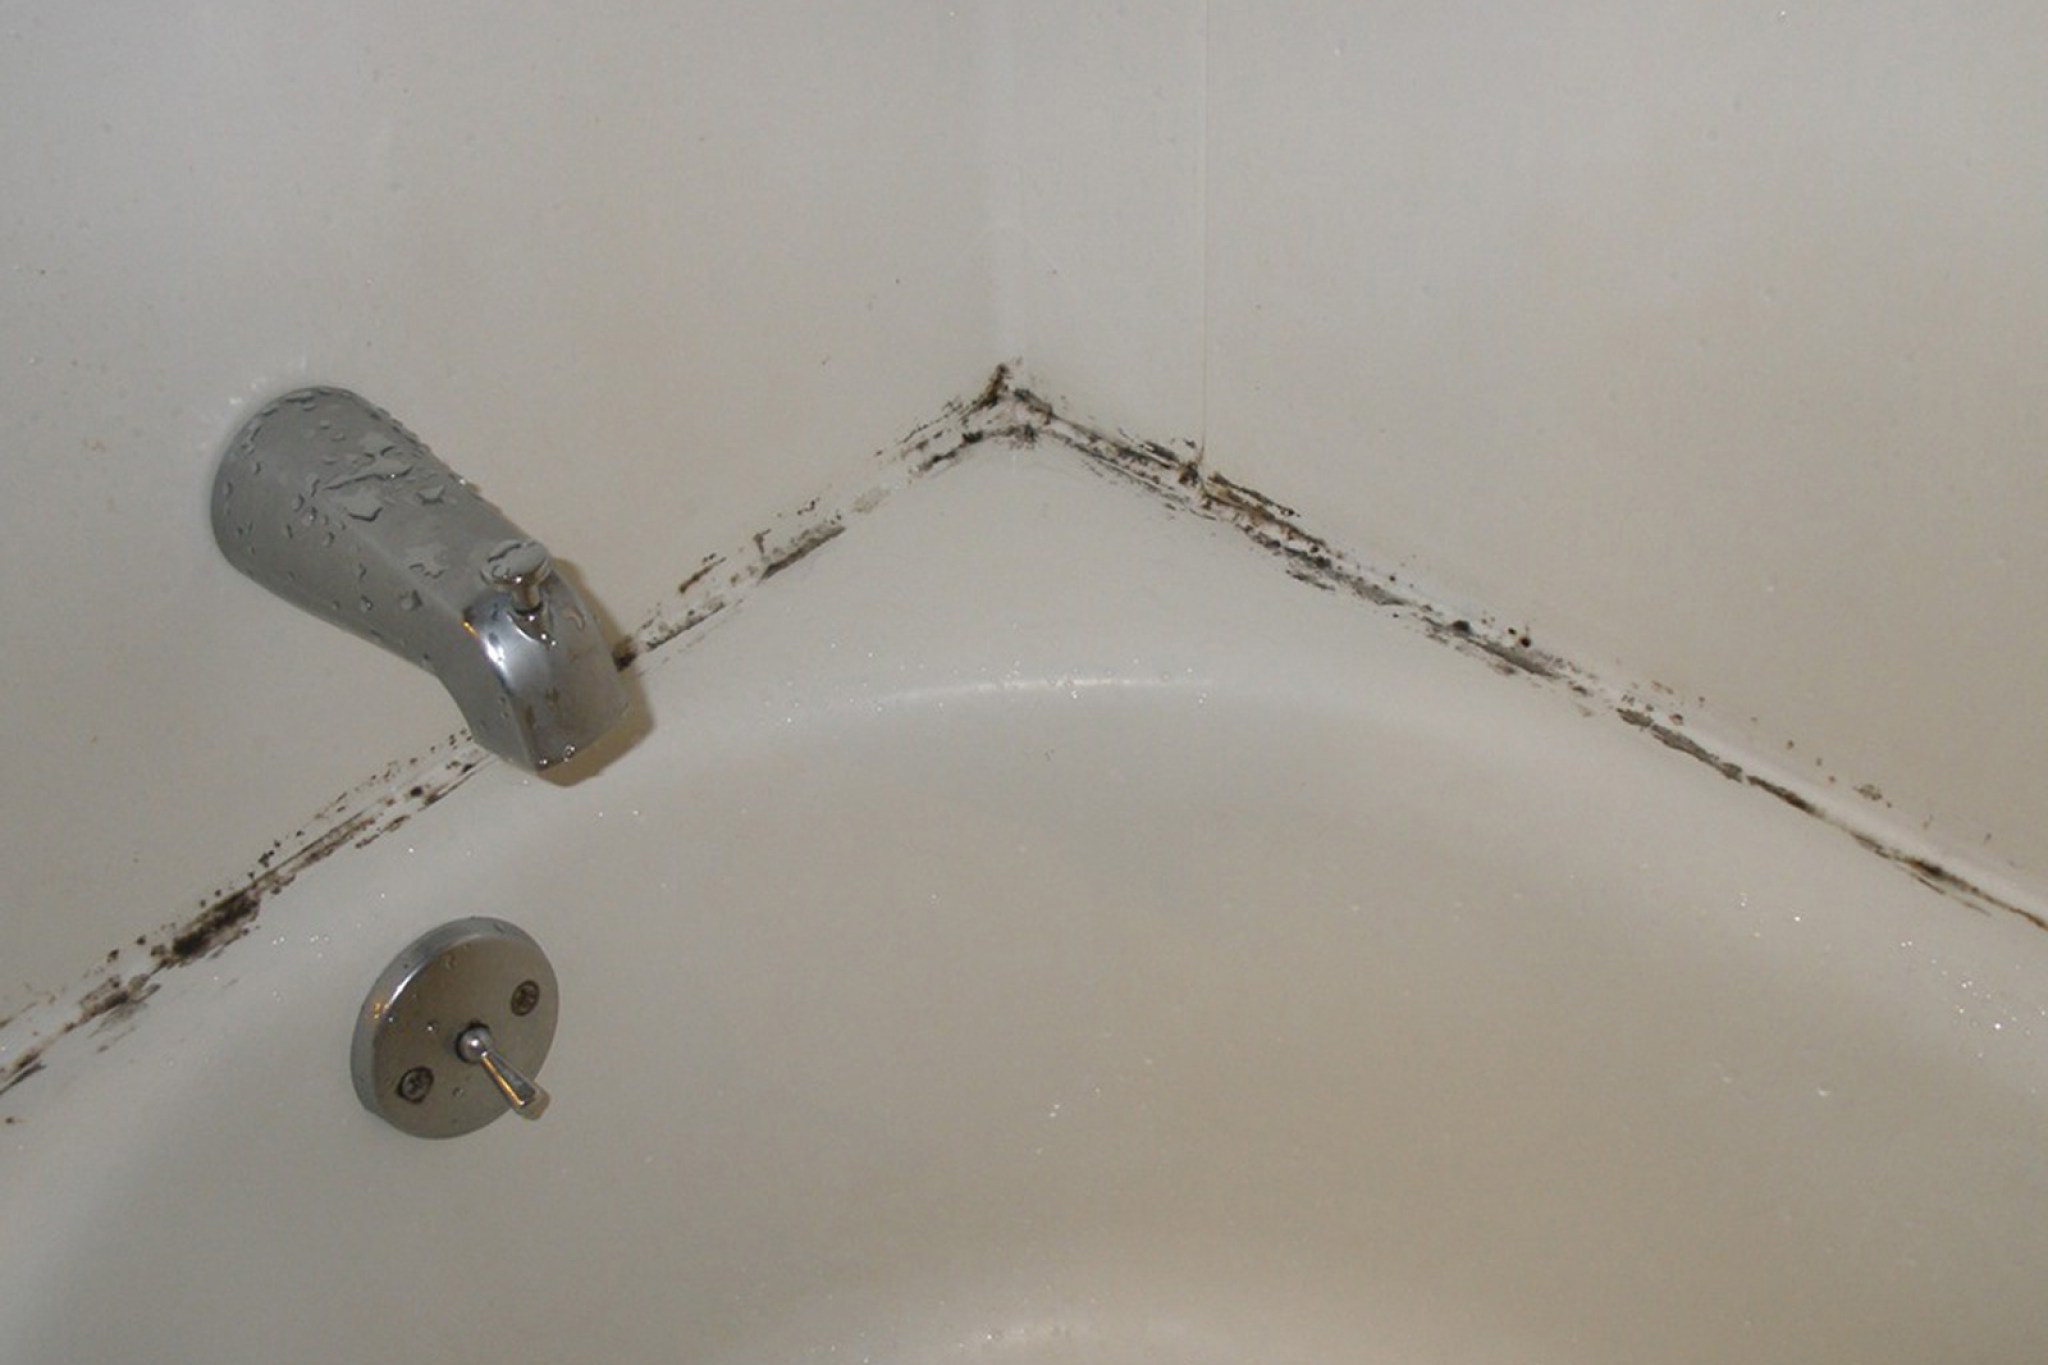 Remove Shower Mould Grout, Grout Mold Cleaner